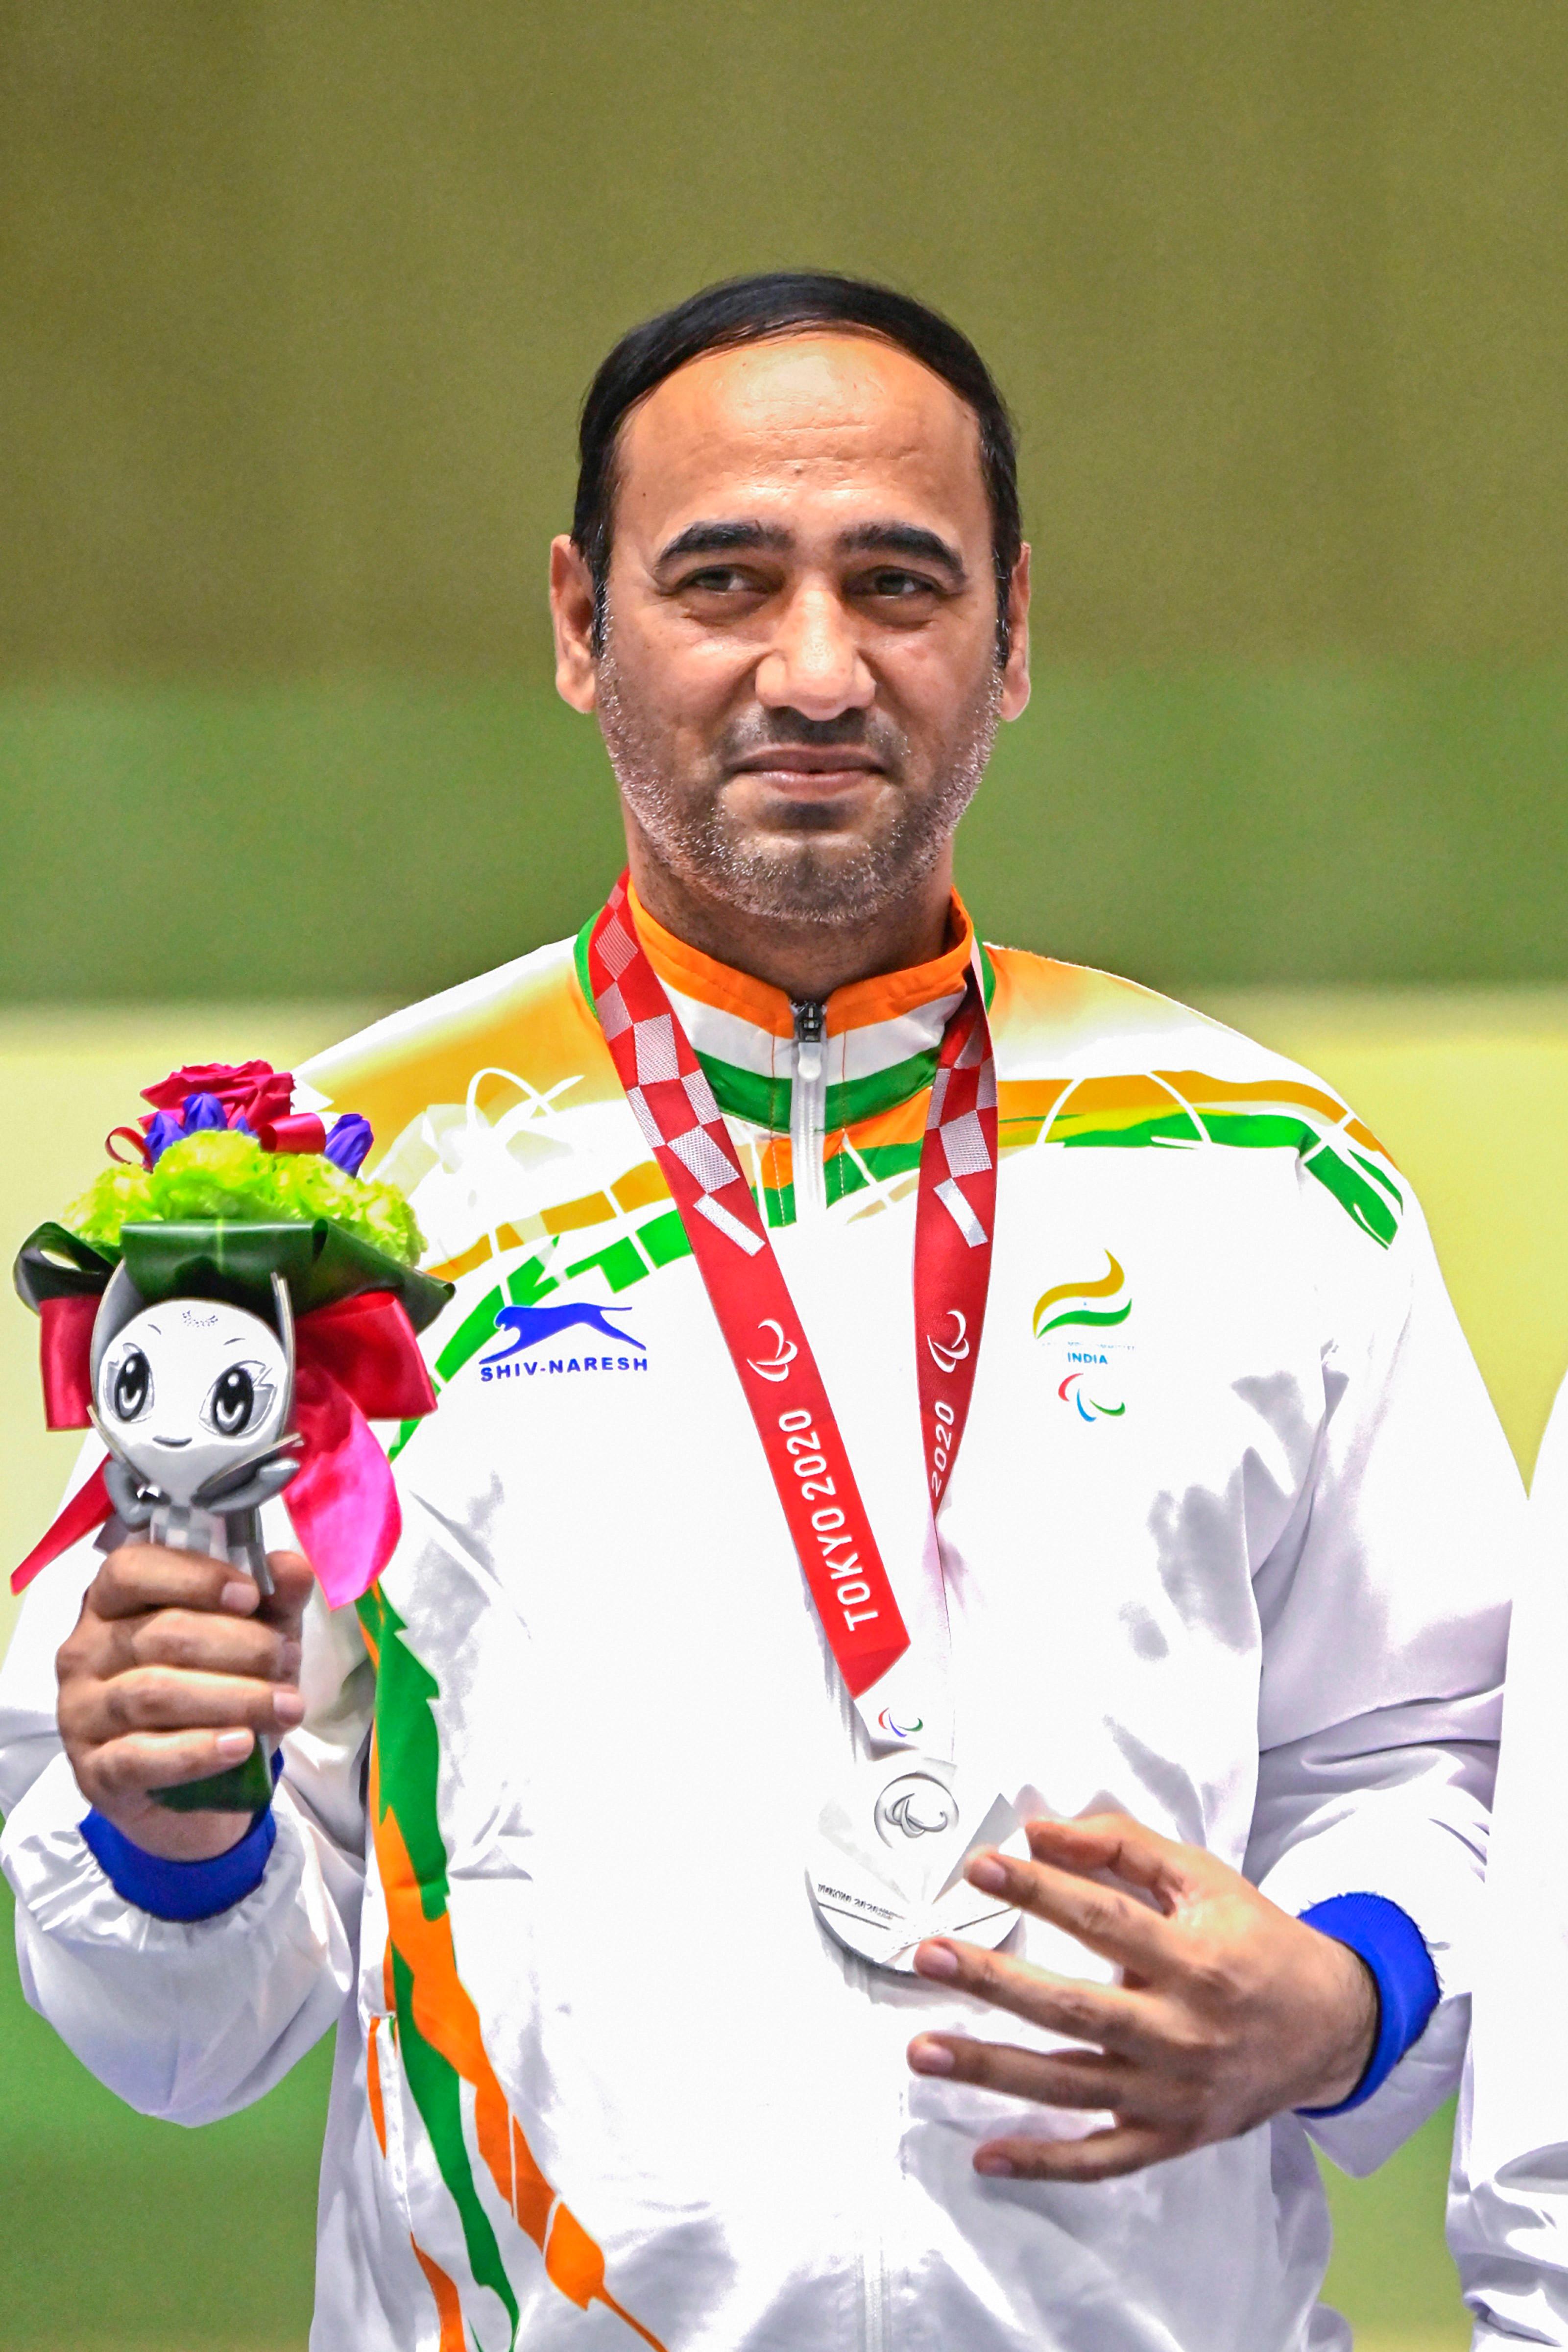 Singhraj Singh Adana - Singhraj Adana bagged the silver in the P4 Mixed 50m Pistol SH1 event at the Tokyo Paralympics. Adana, who had won the bronze in the P1 men's 10m air pistol SH1 event earlier, added a silver to his kitty with an effort of 216.7